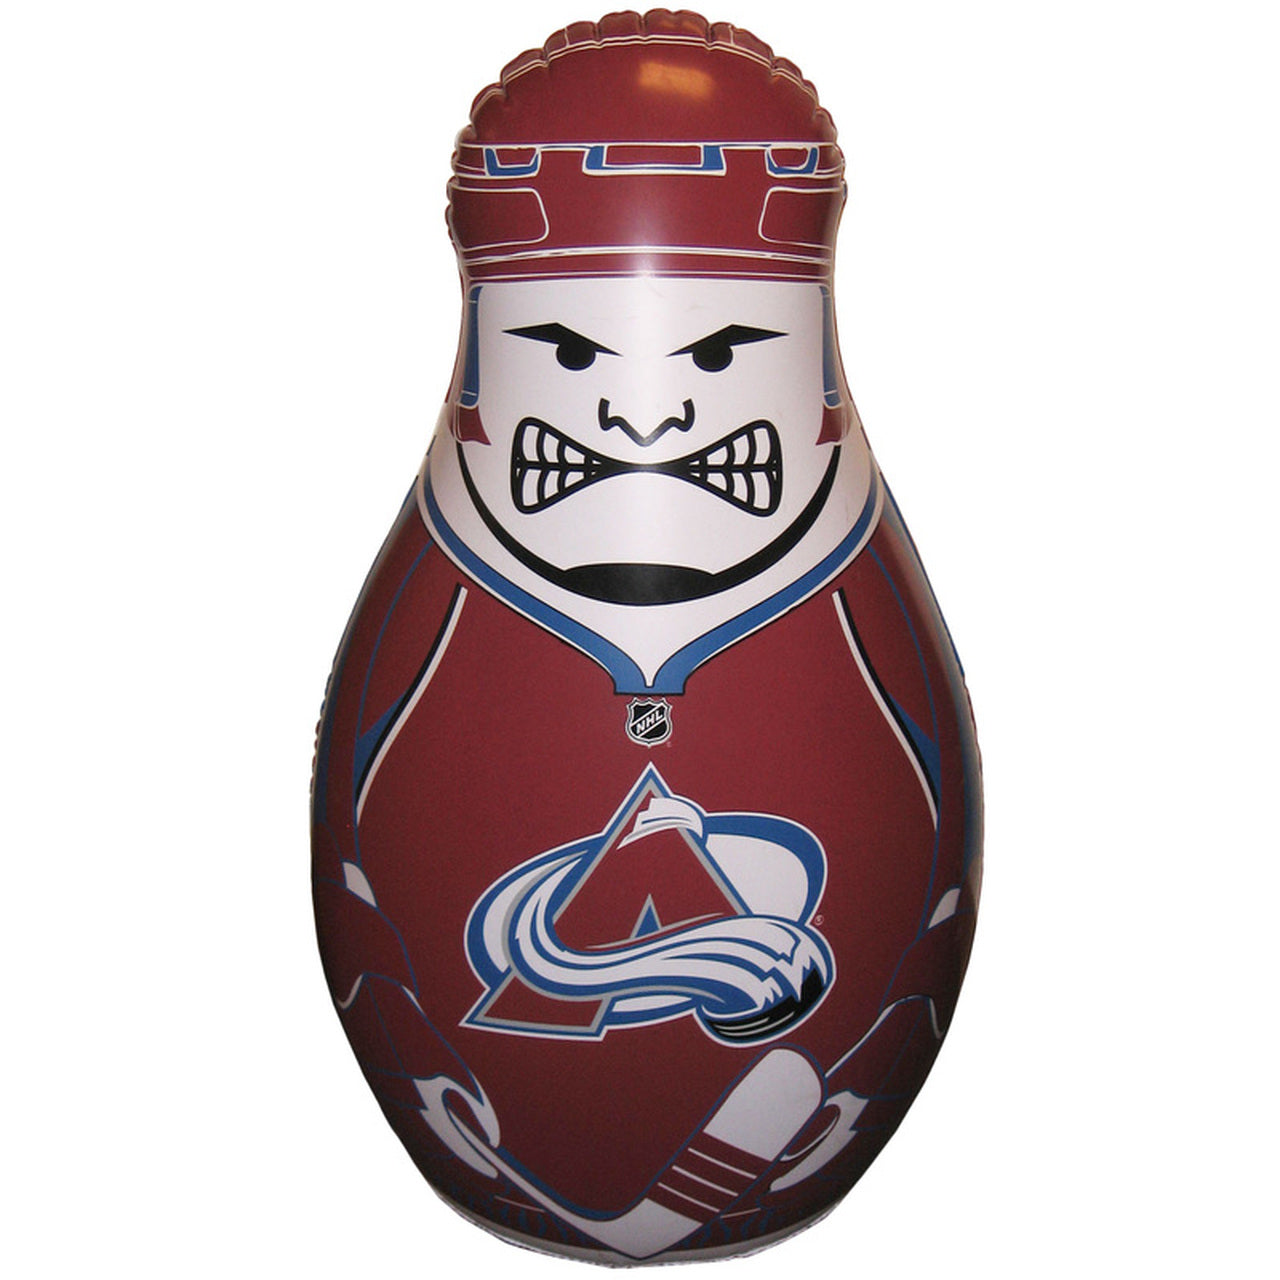 Kids inflatable toy punching bag with Colorado Avalanche hockey player graphics